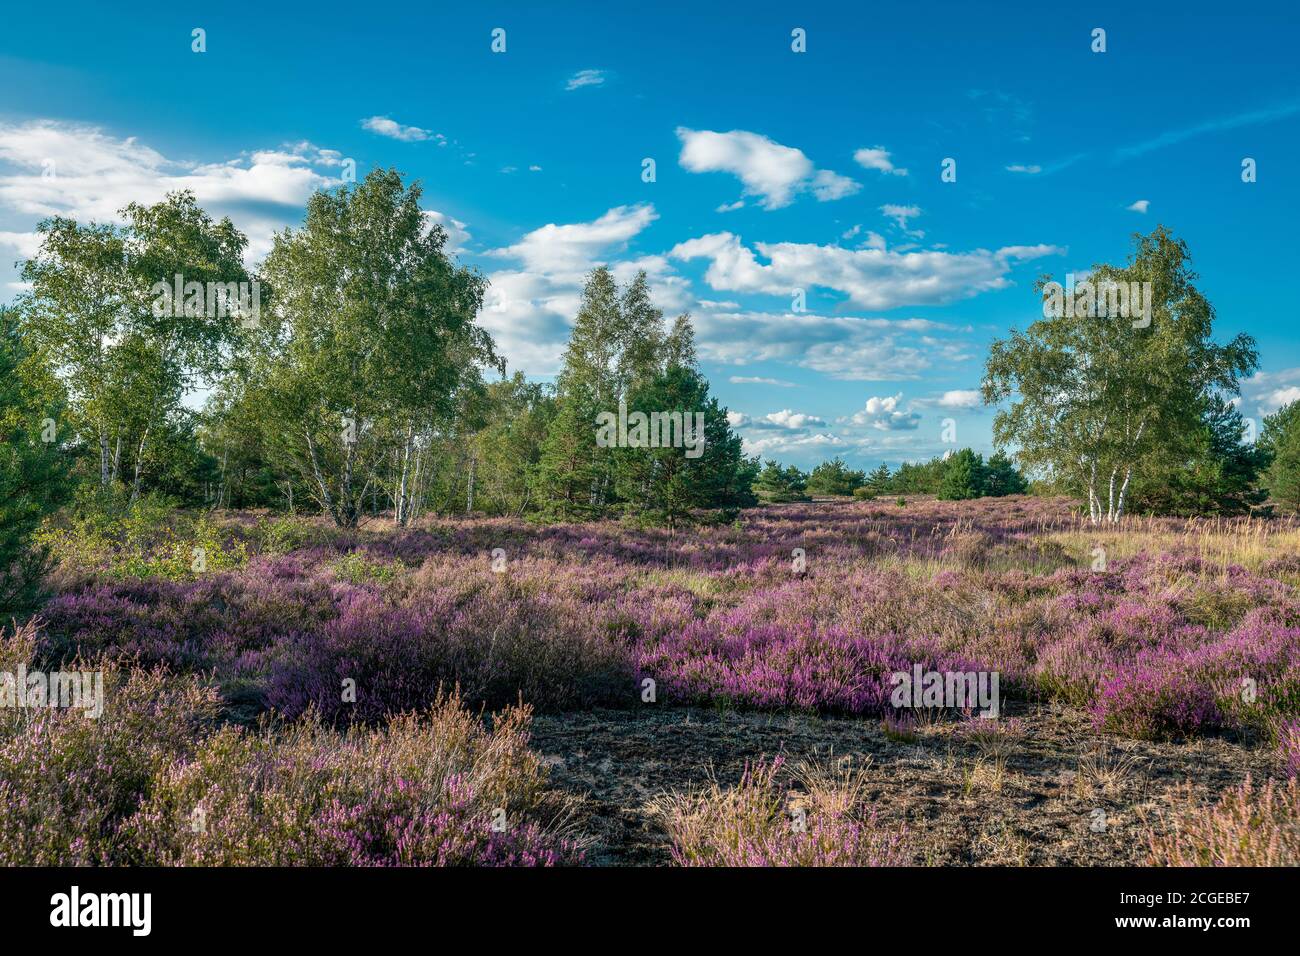 Scenic panorama of a german heather landscape in autumn with purple flowering erica plants, birches and a dramatic cloudy sky Stock Photo